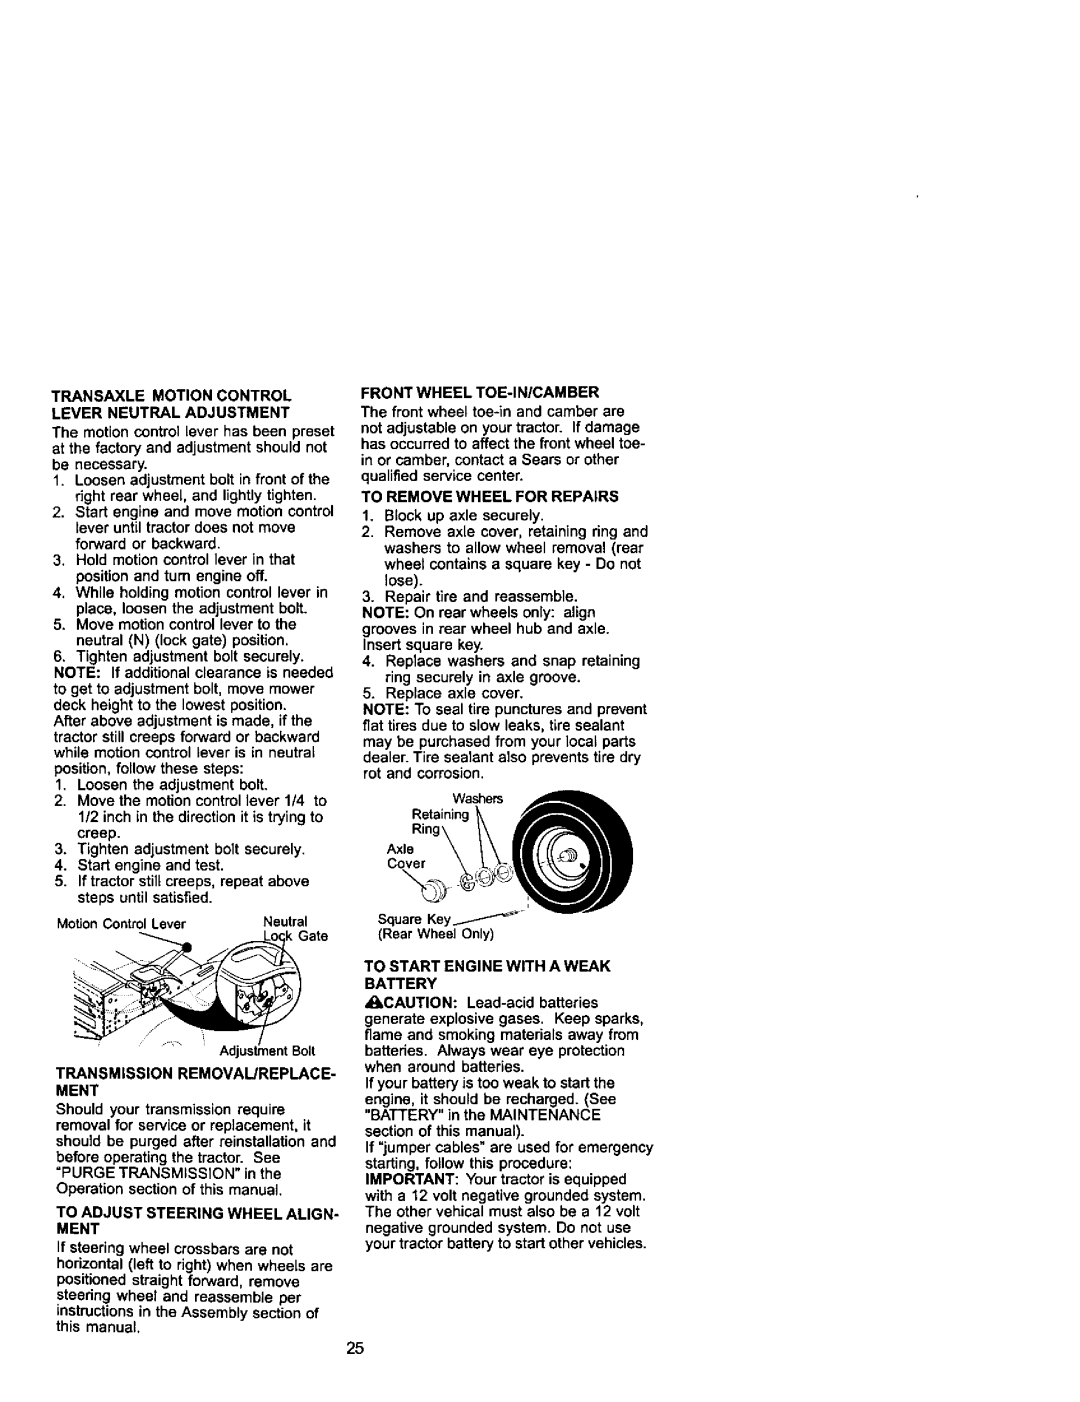 Craftsman 917.271742 owner manual Transaxle Motion Control Lever Neutral Adjustment 